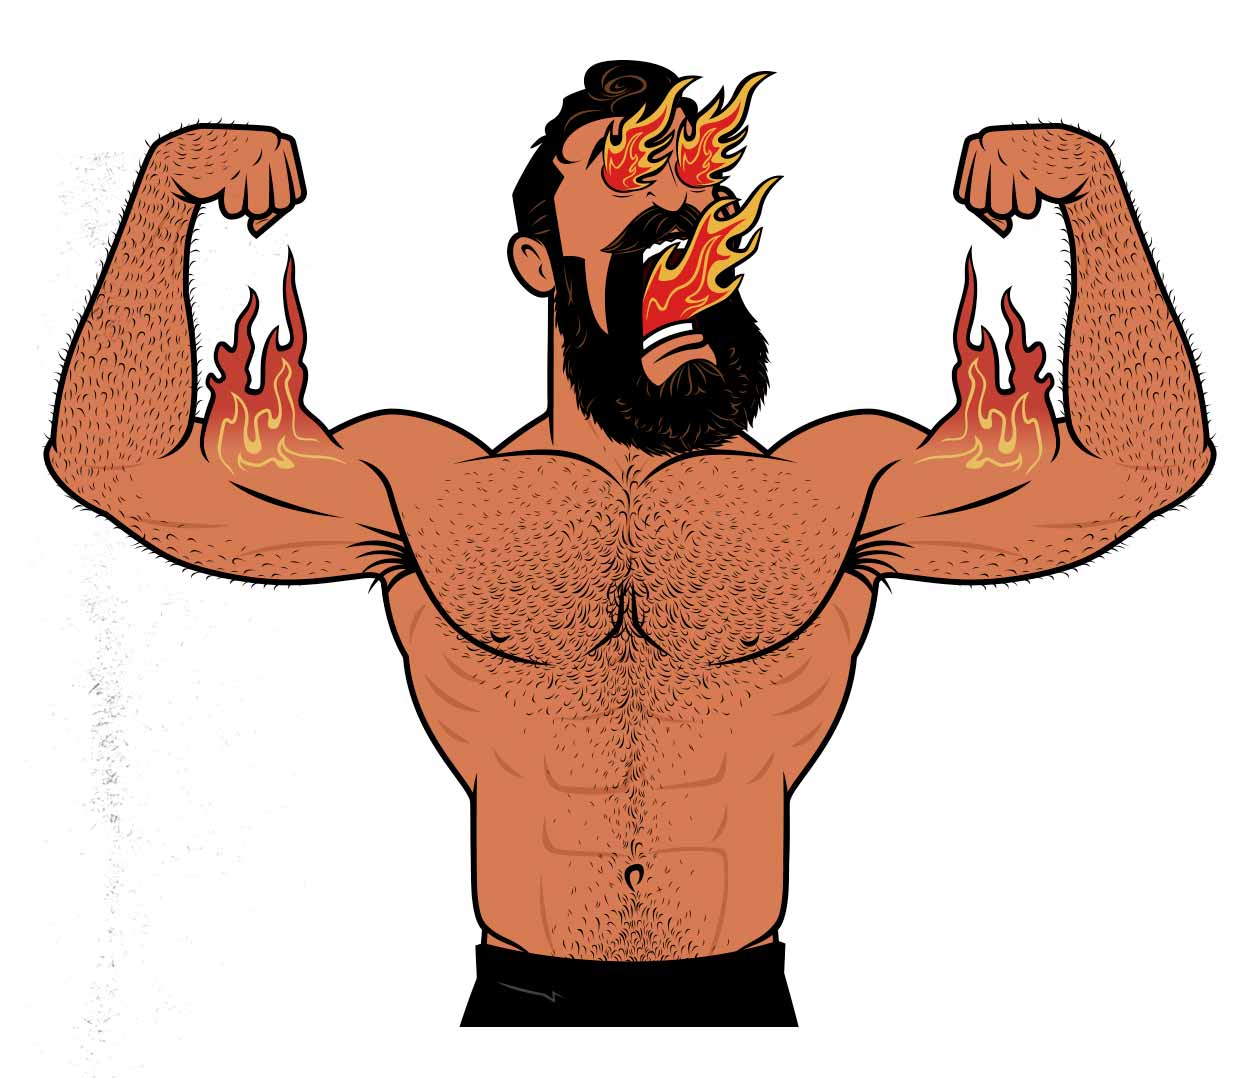 Outlift illustration of a bodybuilder with a burning muscle pump.